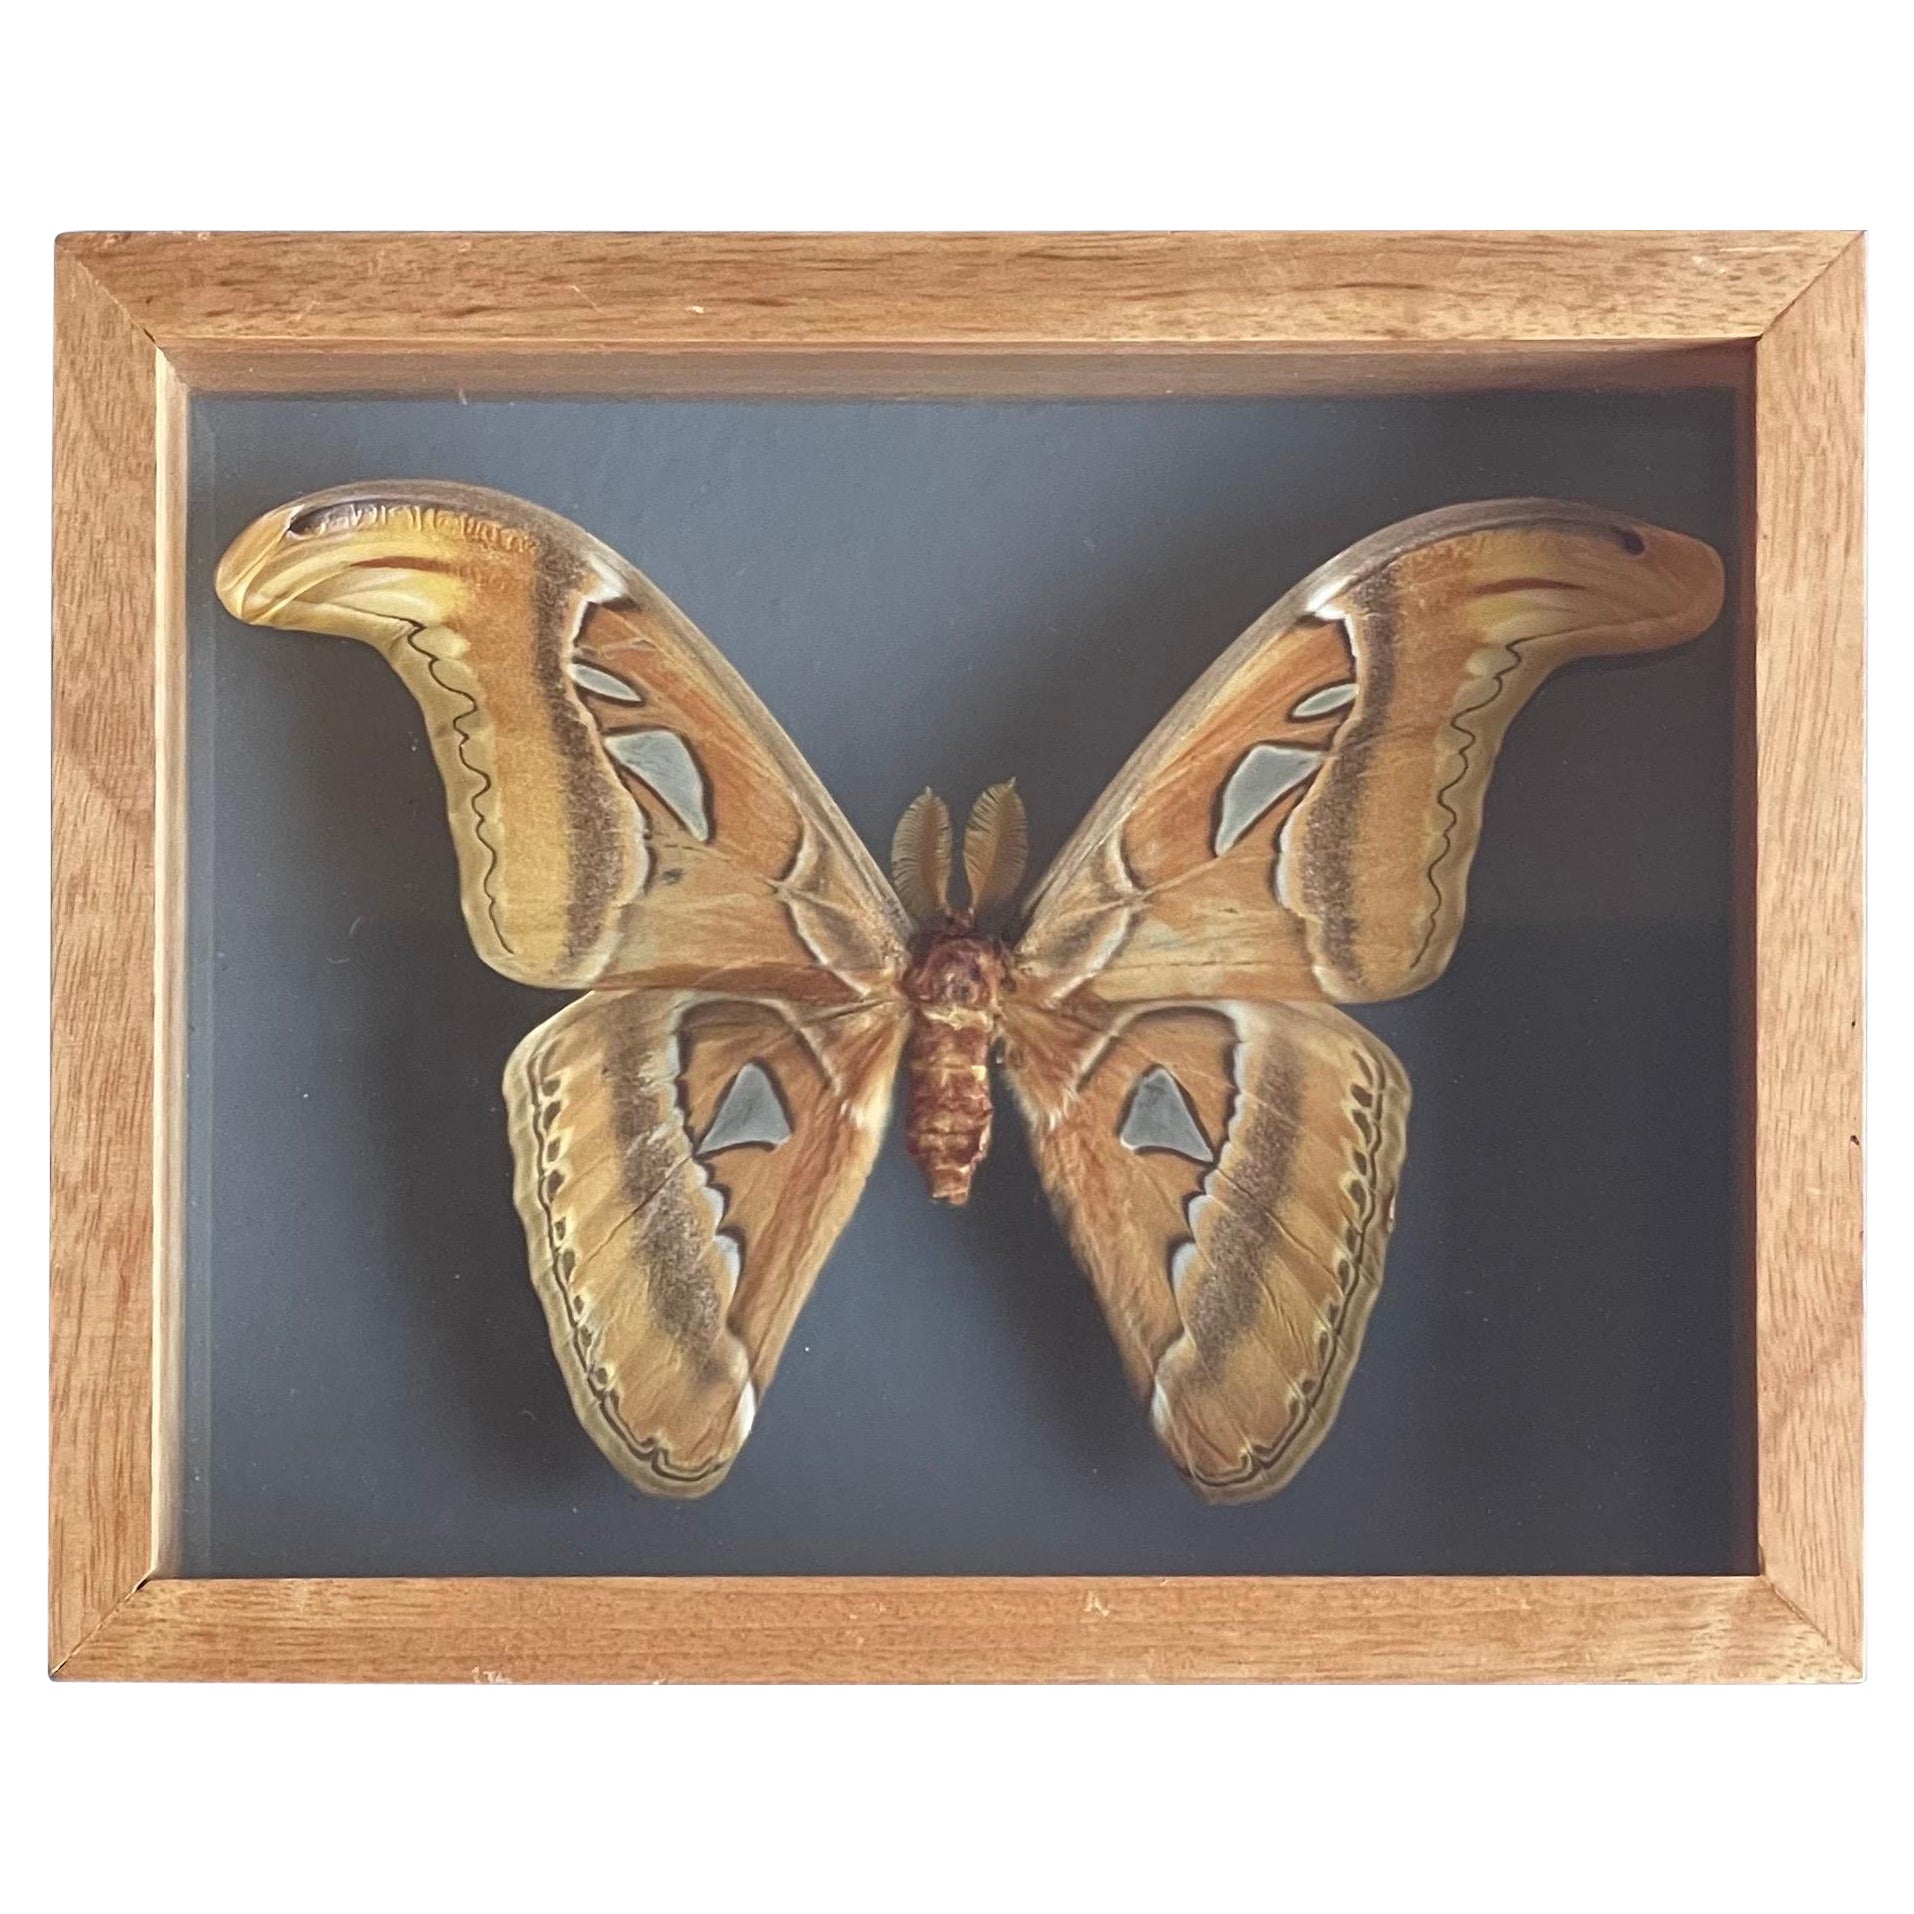 Authentic "Atlas" Butterfly Taxidermy Sculpture